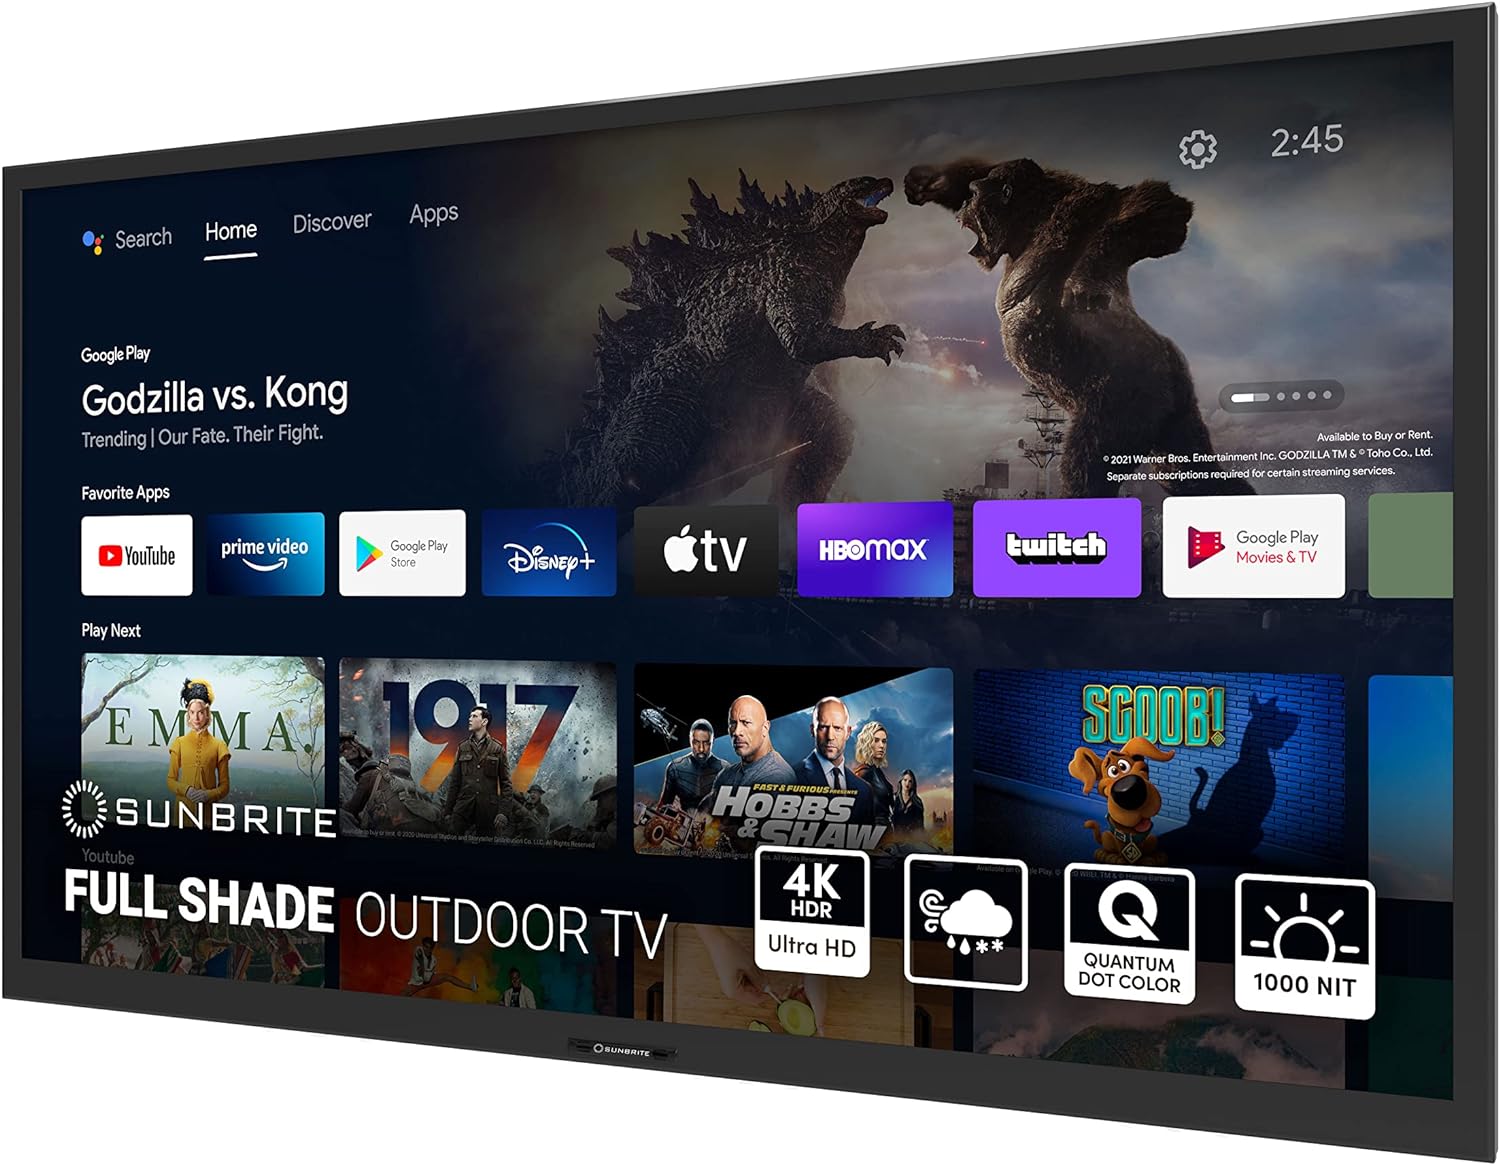 This smart TV is perfect for your Airbnb outdoor space with smart TV features, a real remote, and improved picture quality